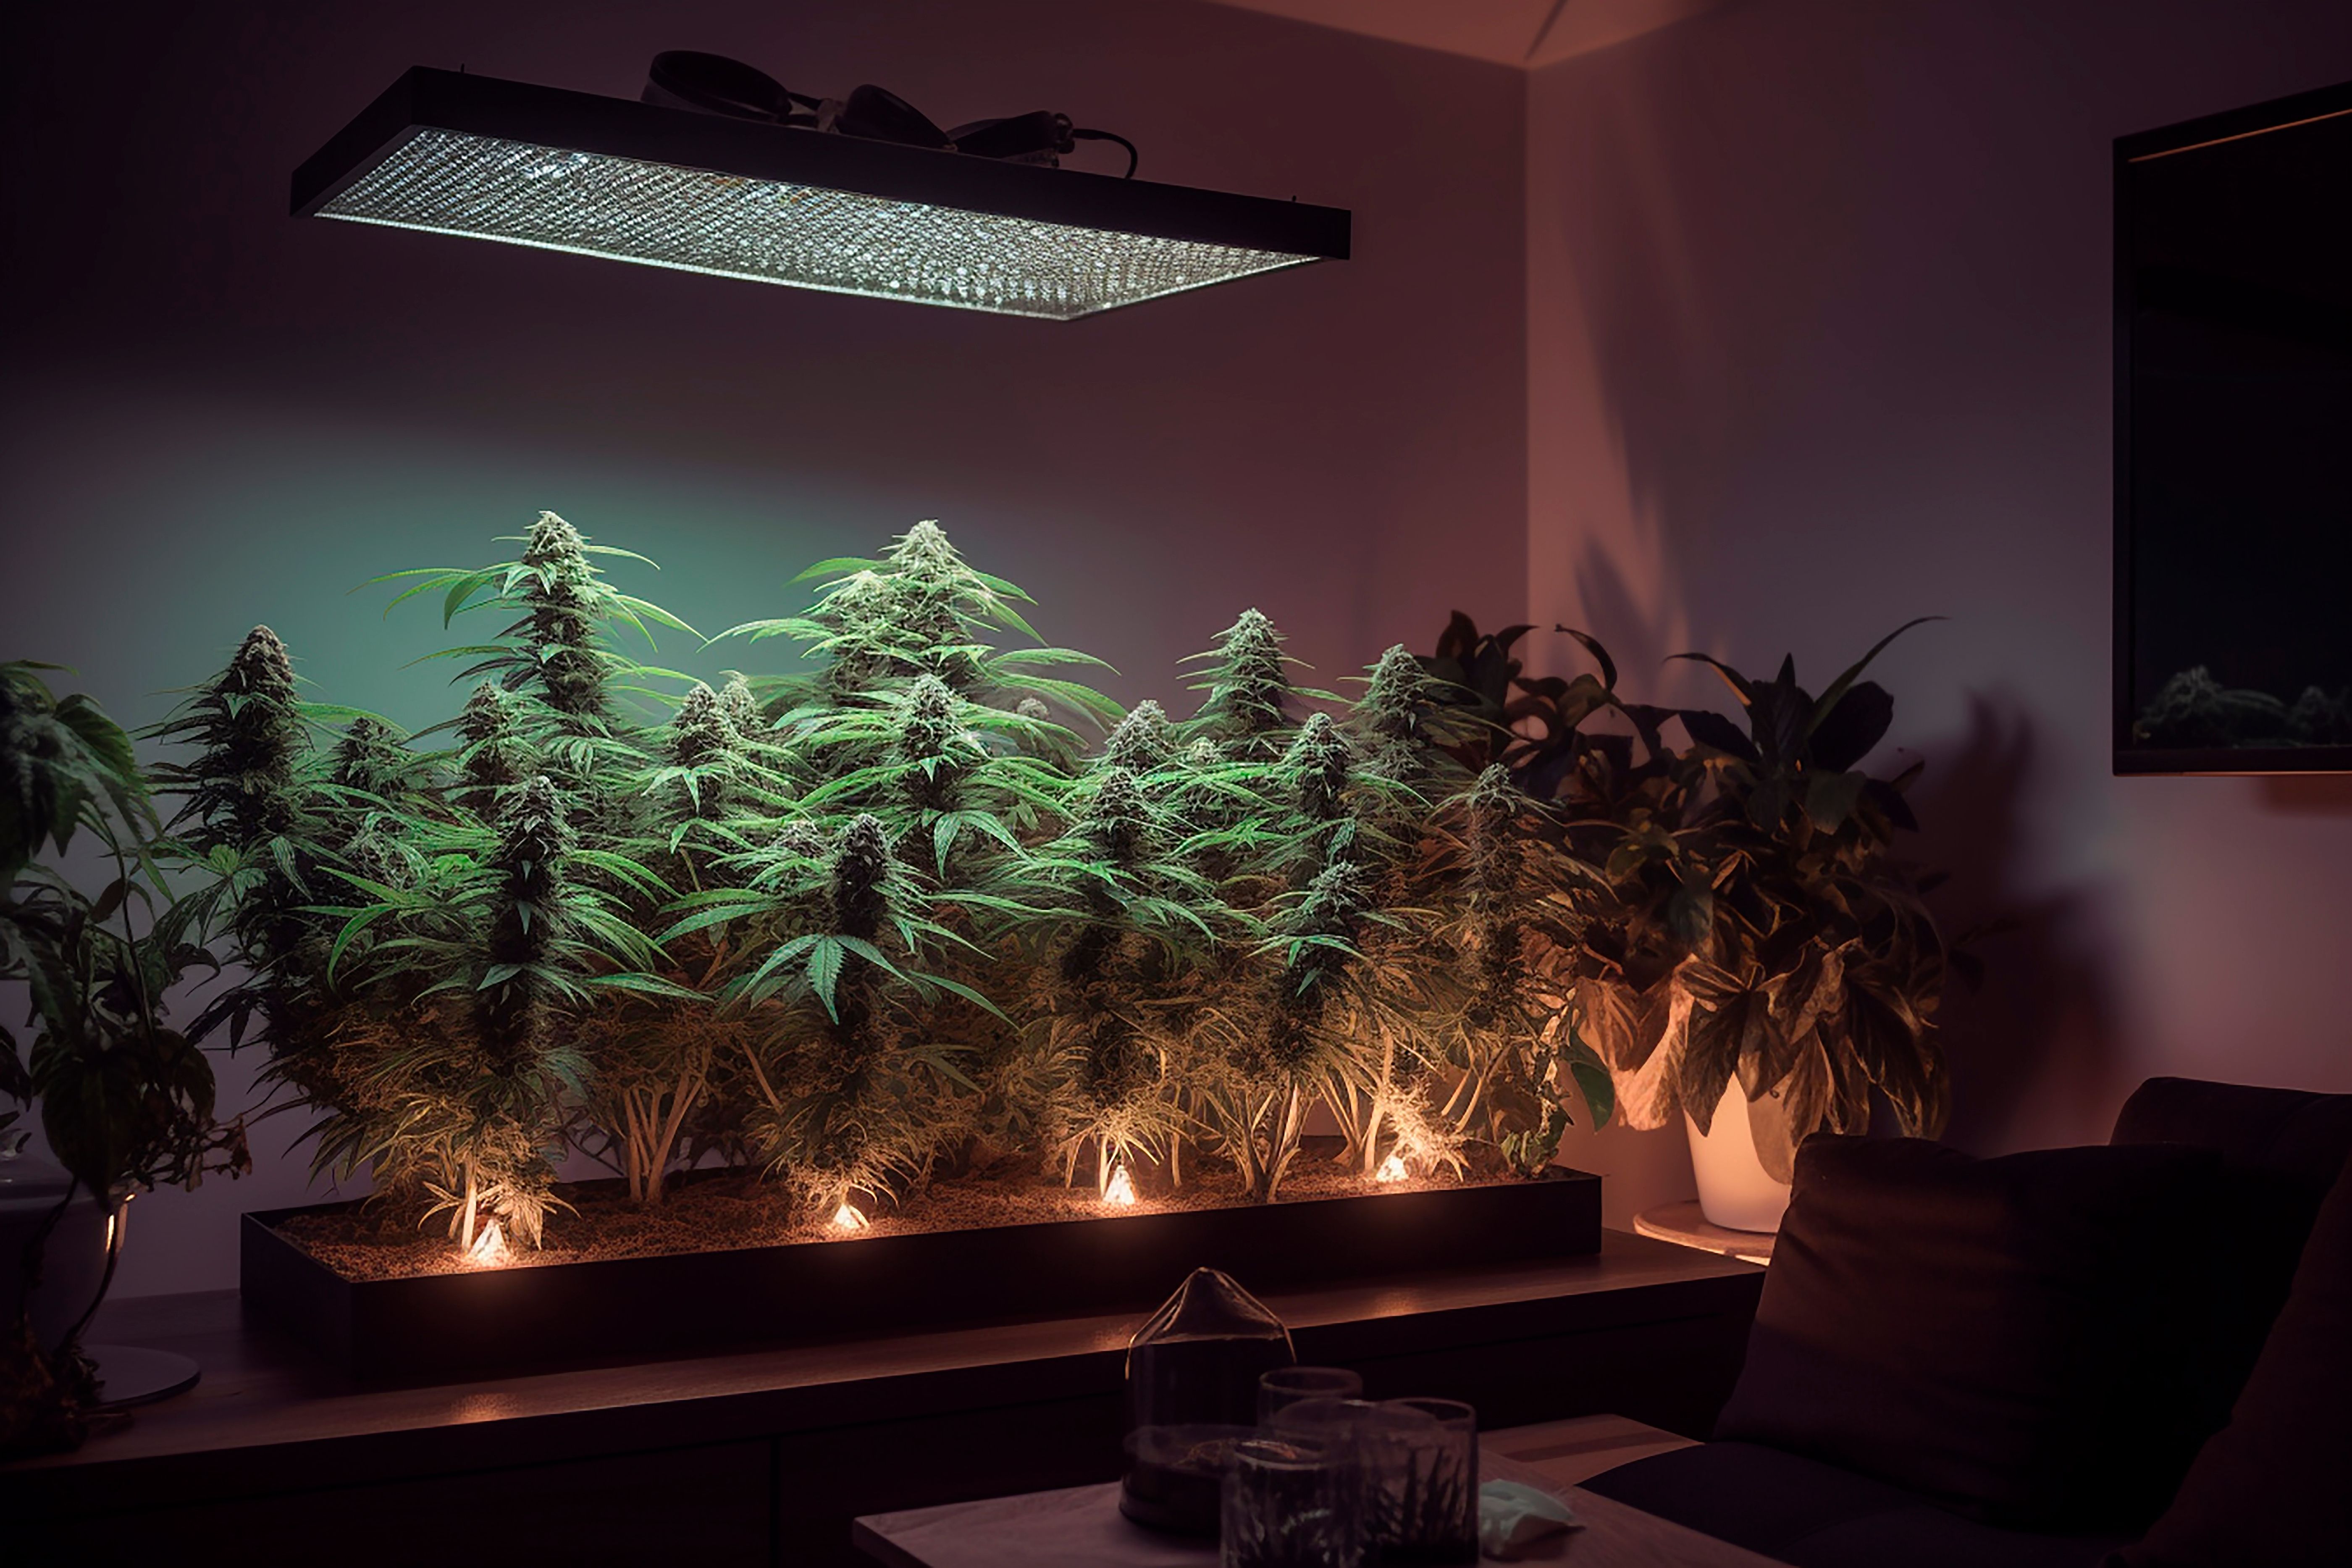 Indoor cannabis grow space with cannabis plants growing on a table under a light